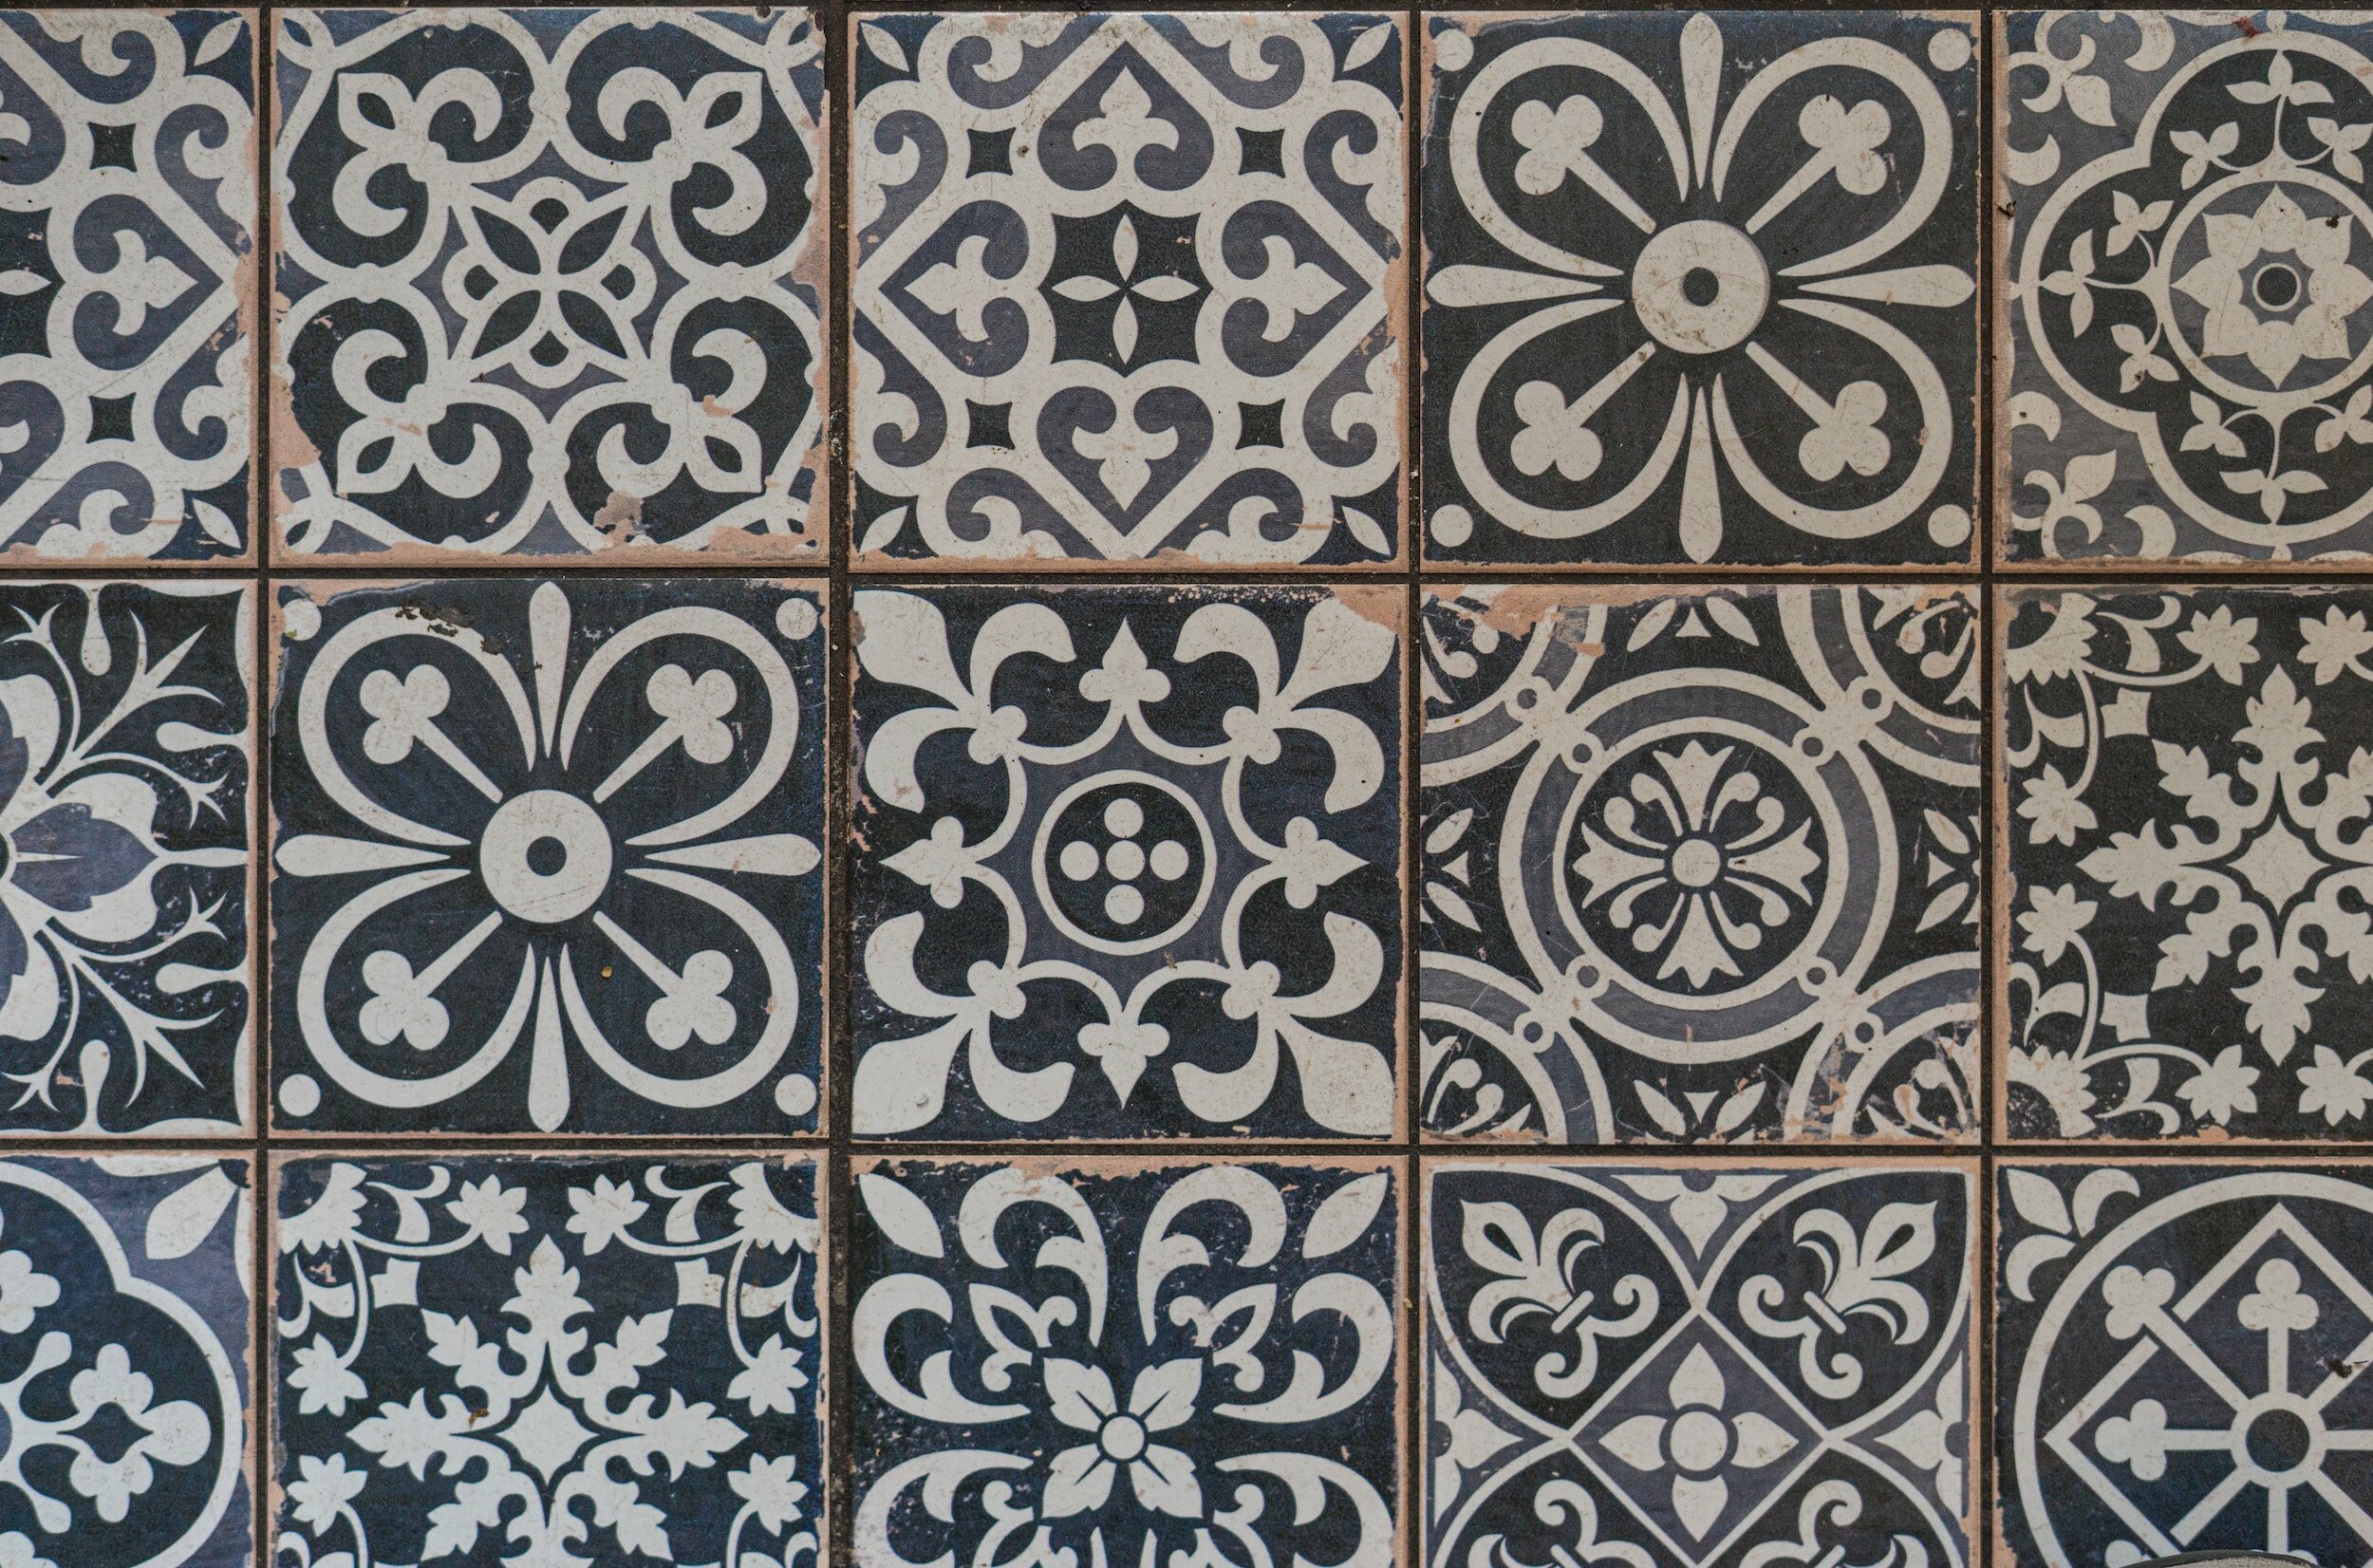 Example of painted tile flooring